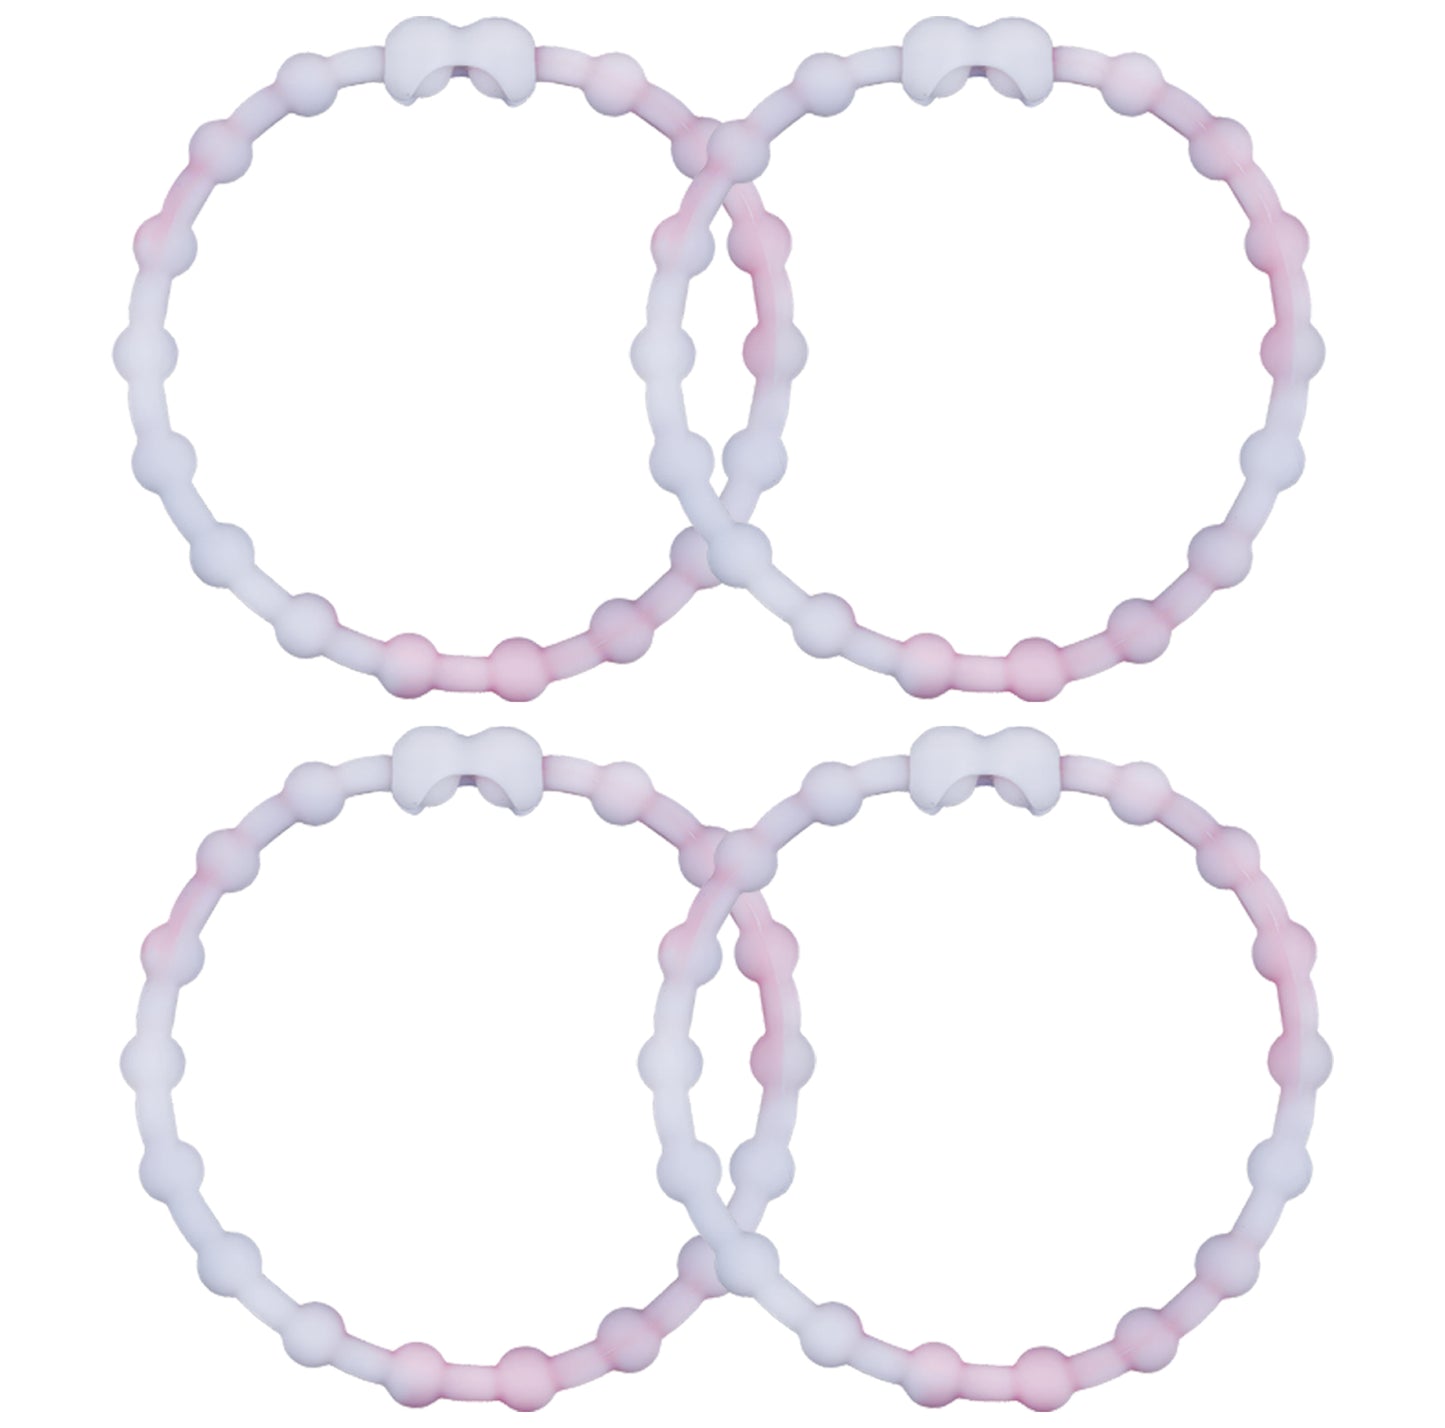 Cloudy Pink Hair Ties (4-Pack) | Soft Romance, Secure Hold, Gentle on Hair